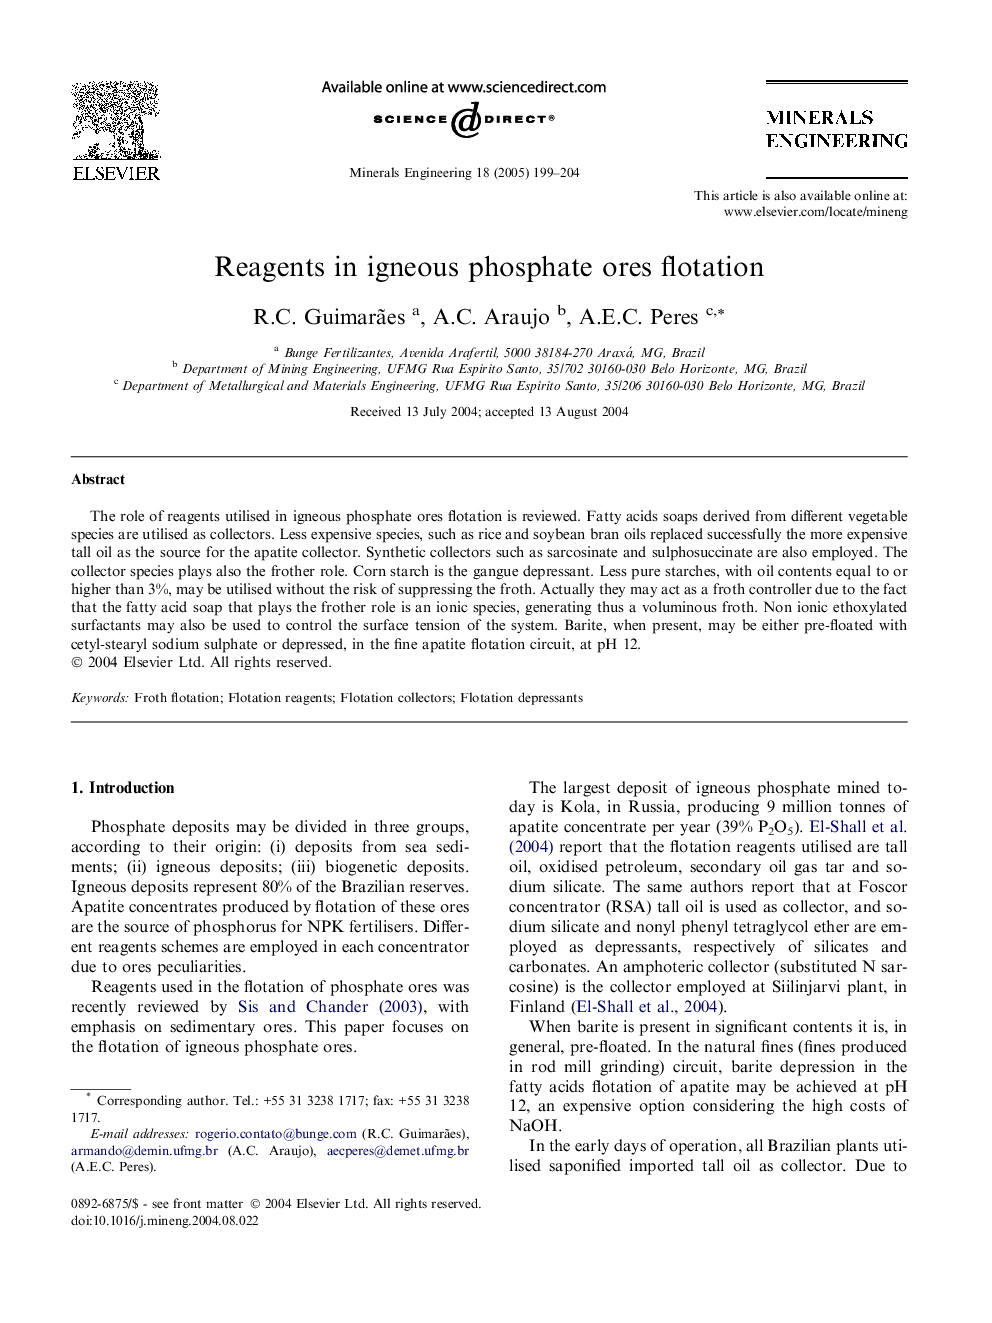 Reagents in igneous phosphate ores flotation